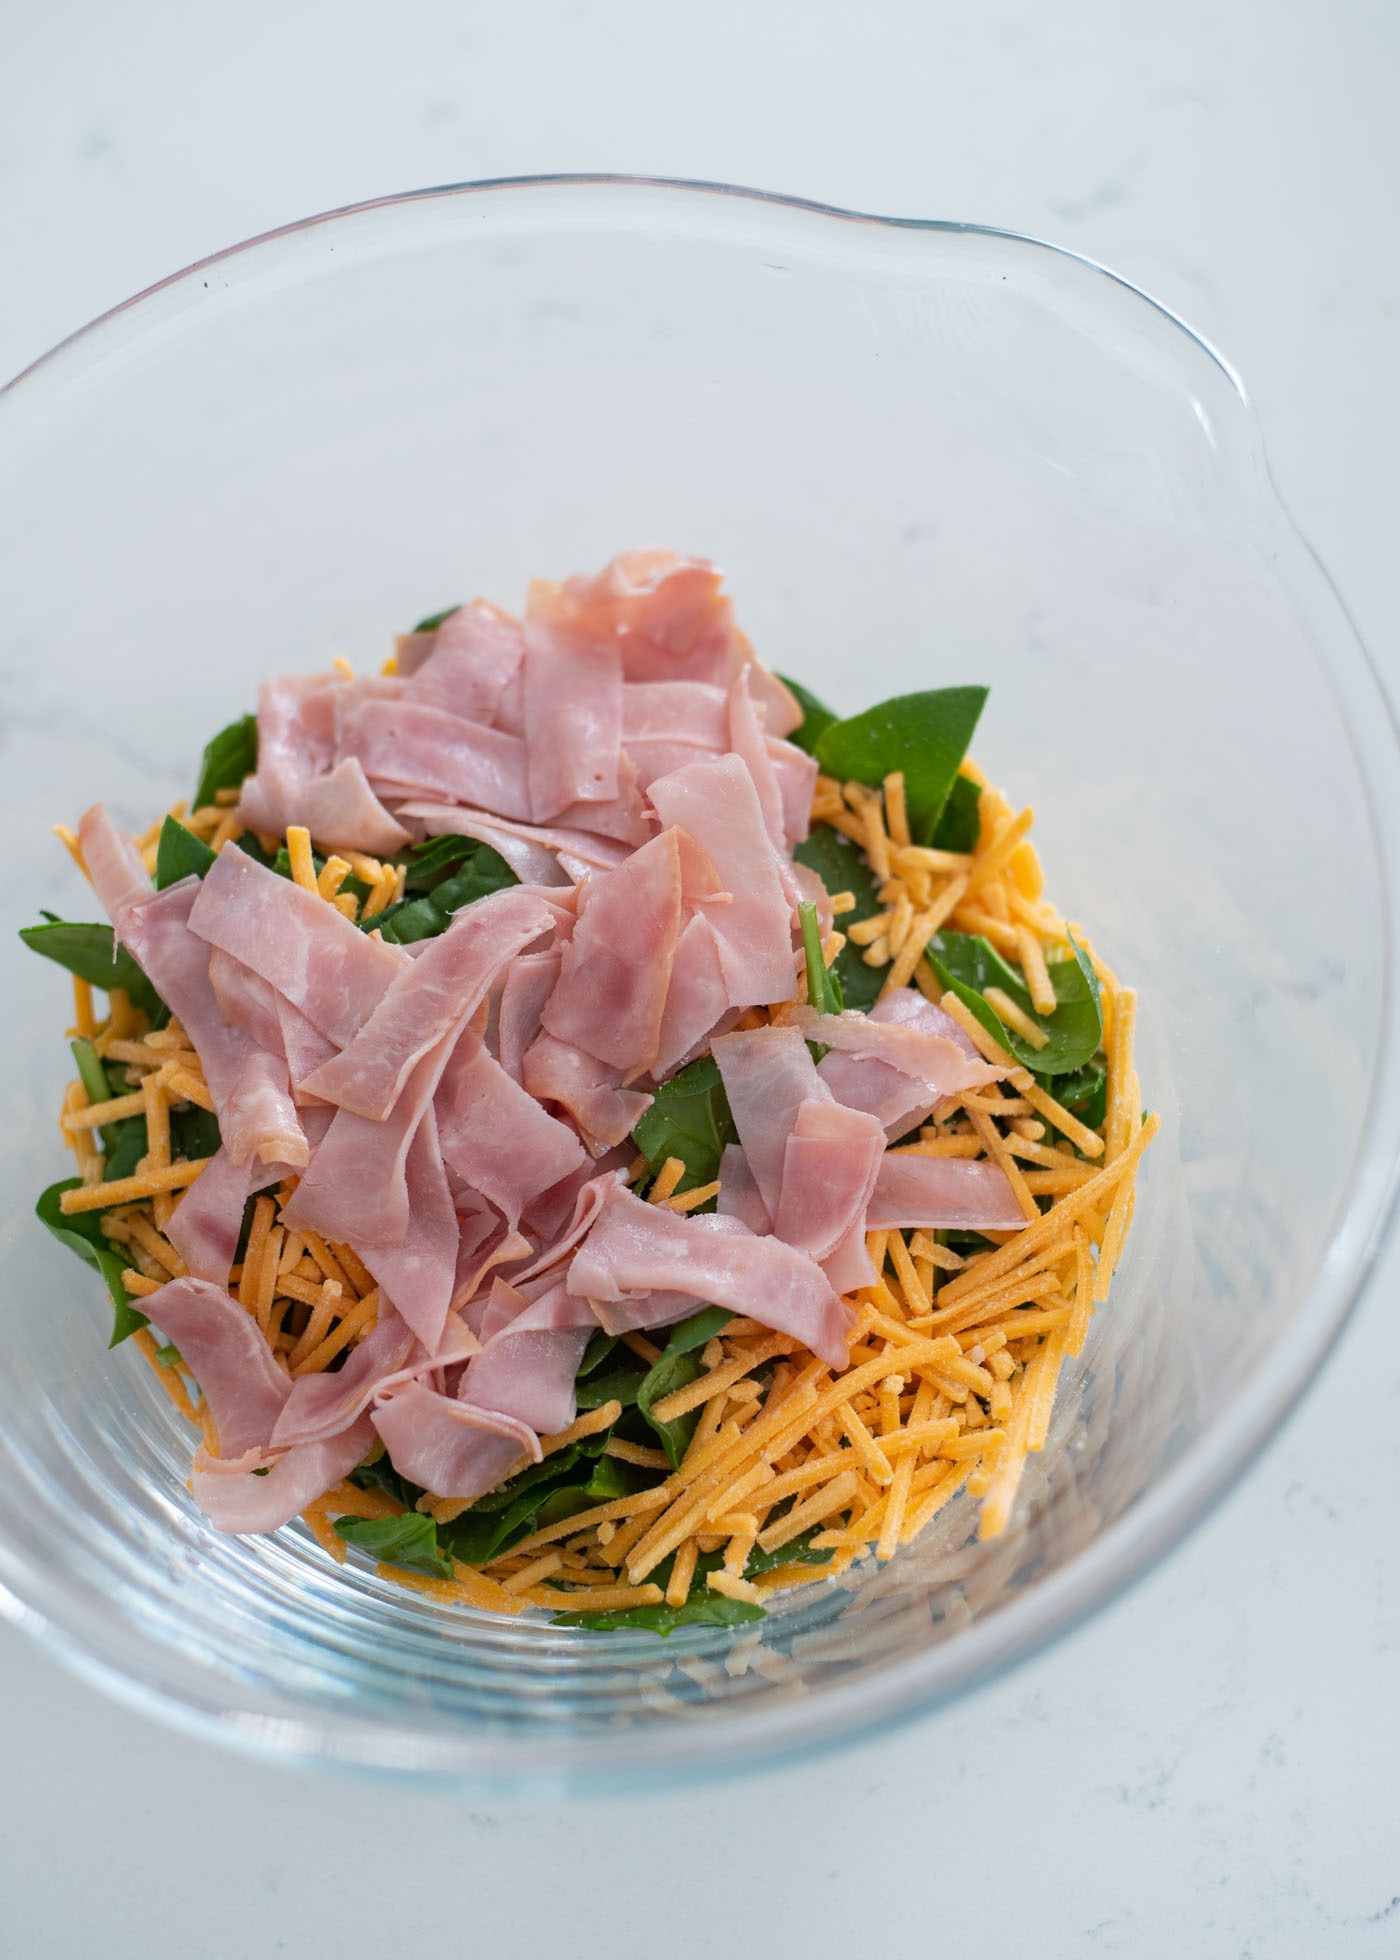 Spinach, sliced ham, grated cheese are combined in a mixing bowl